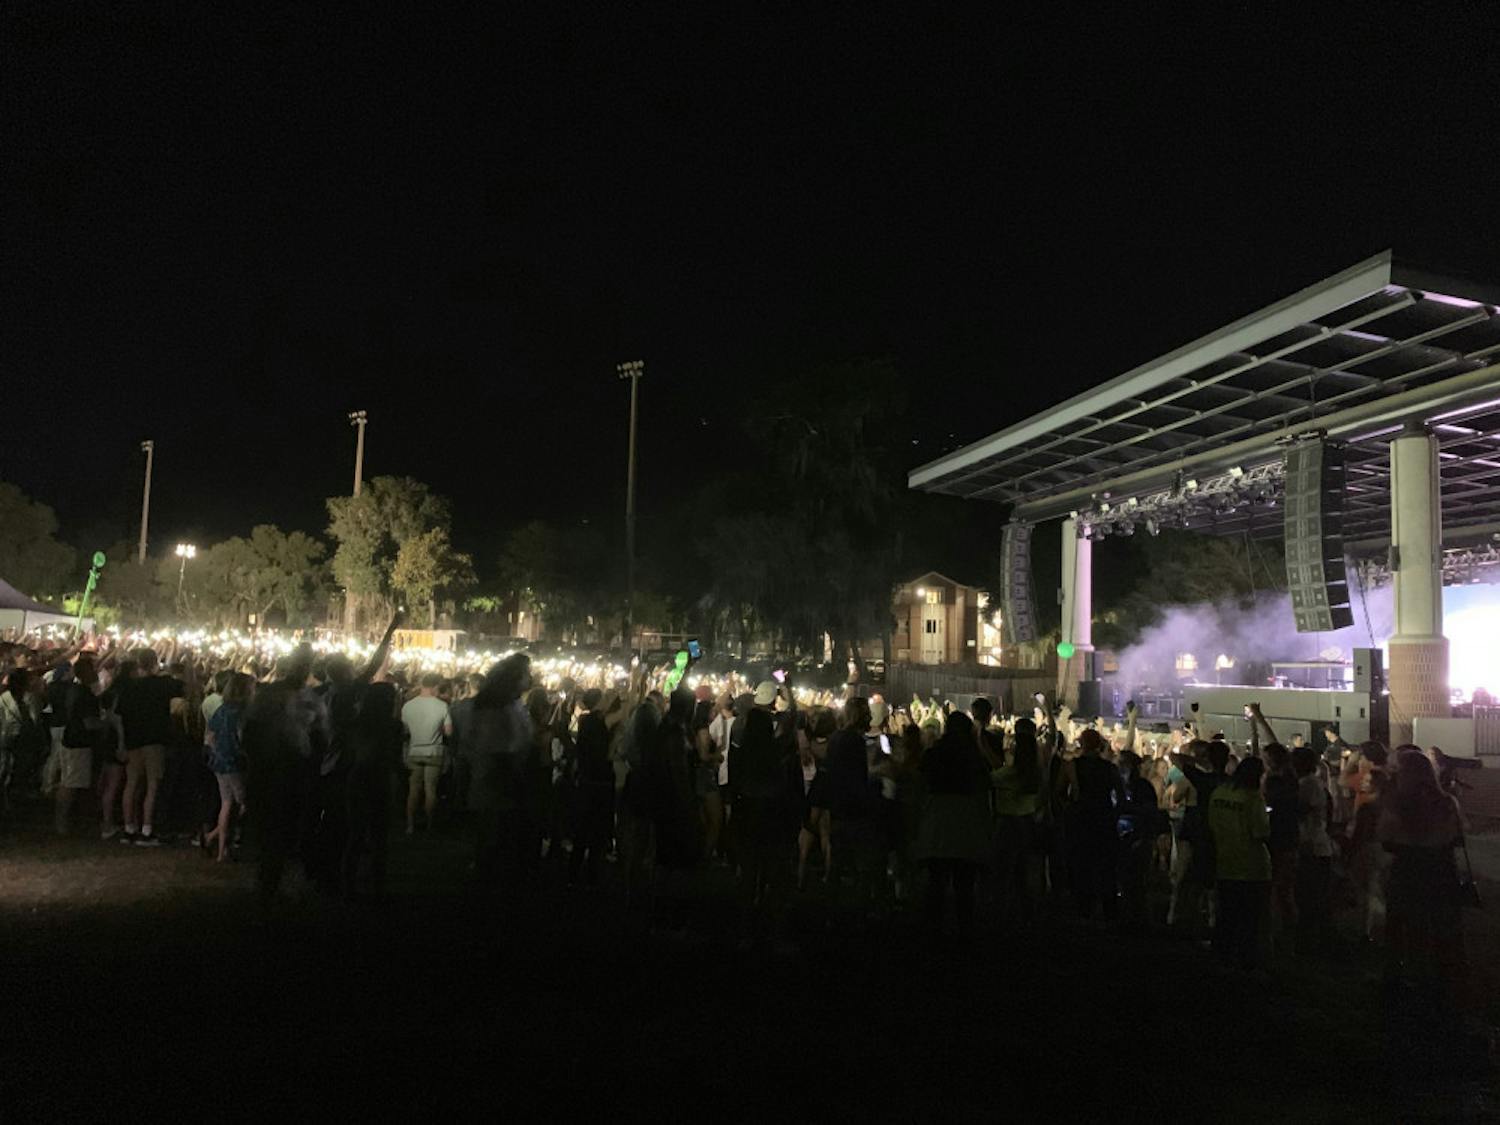 About 1,500 people attended the last Student Government Productions concert of the year featuring electronic dance music artists RL Grime and Lost Kings. 